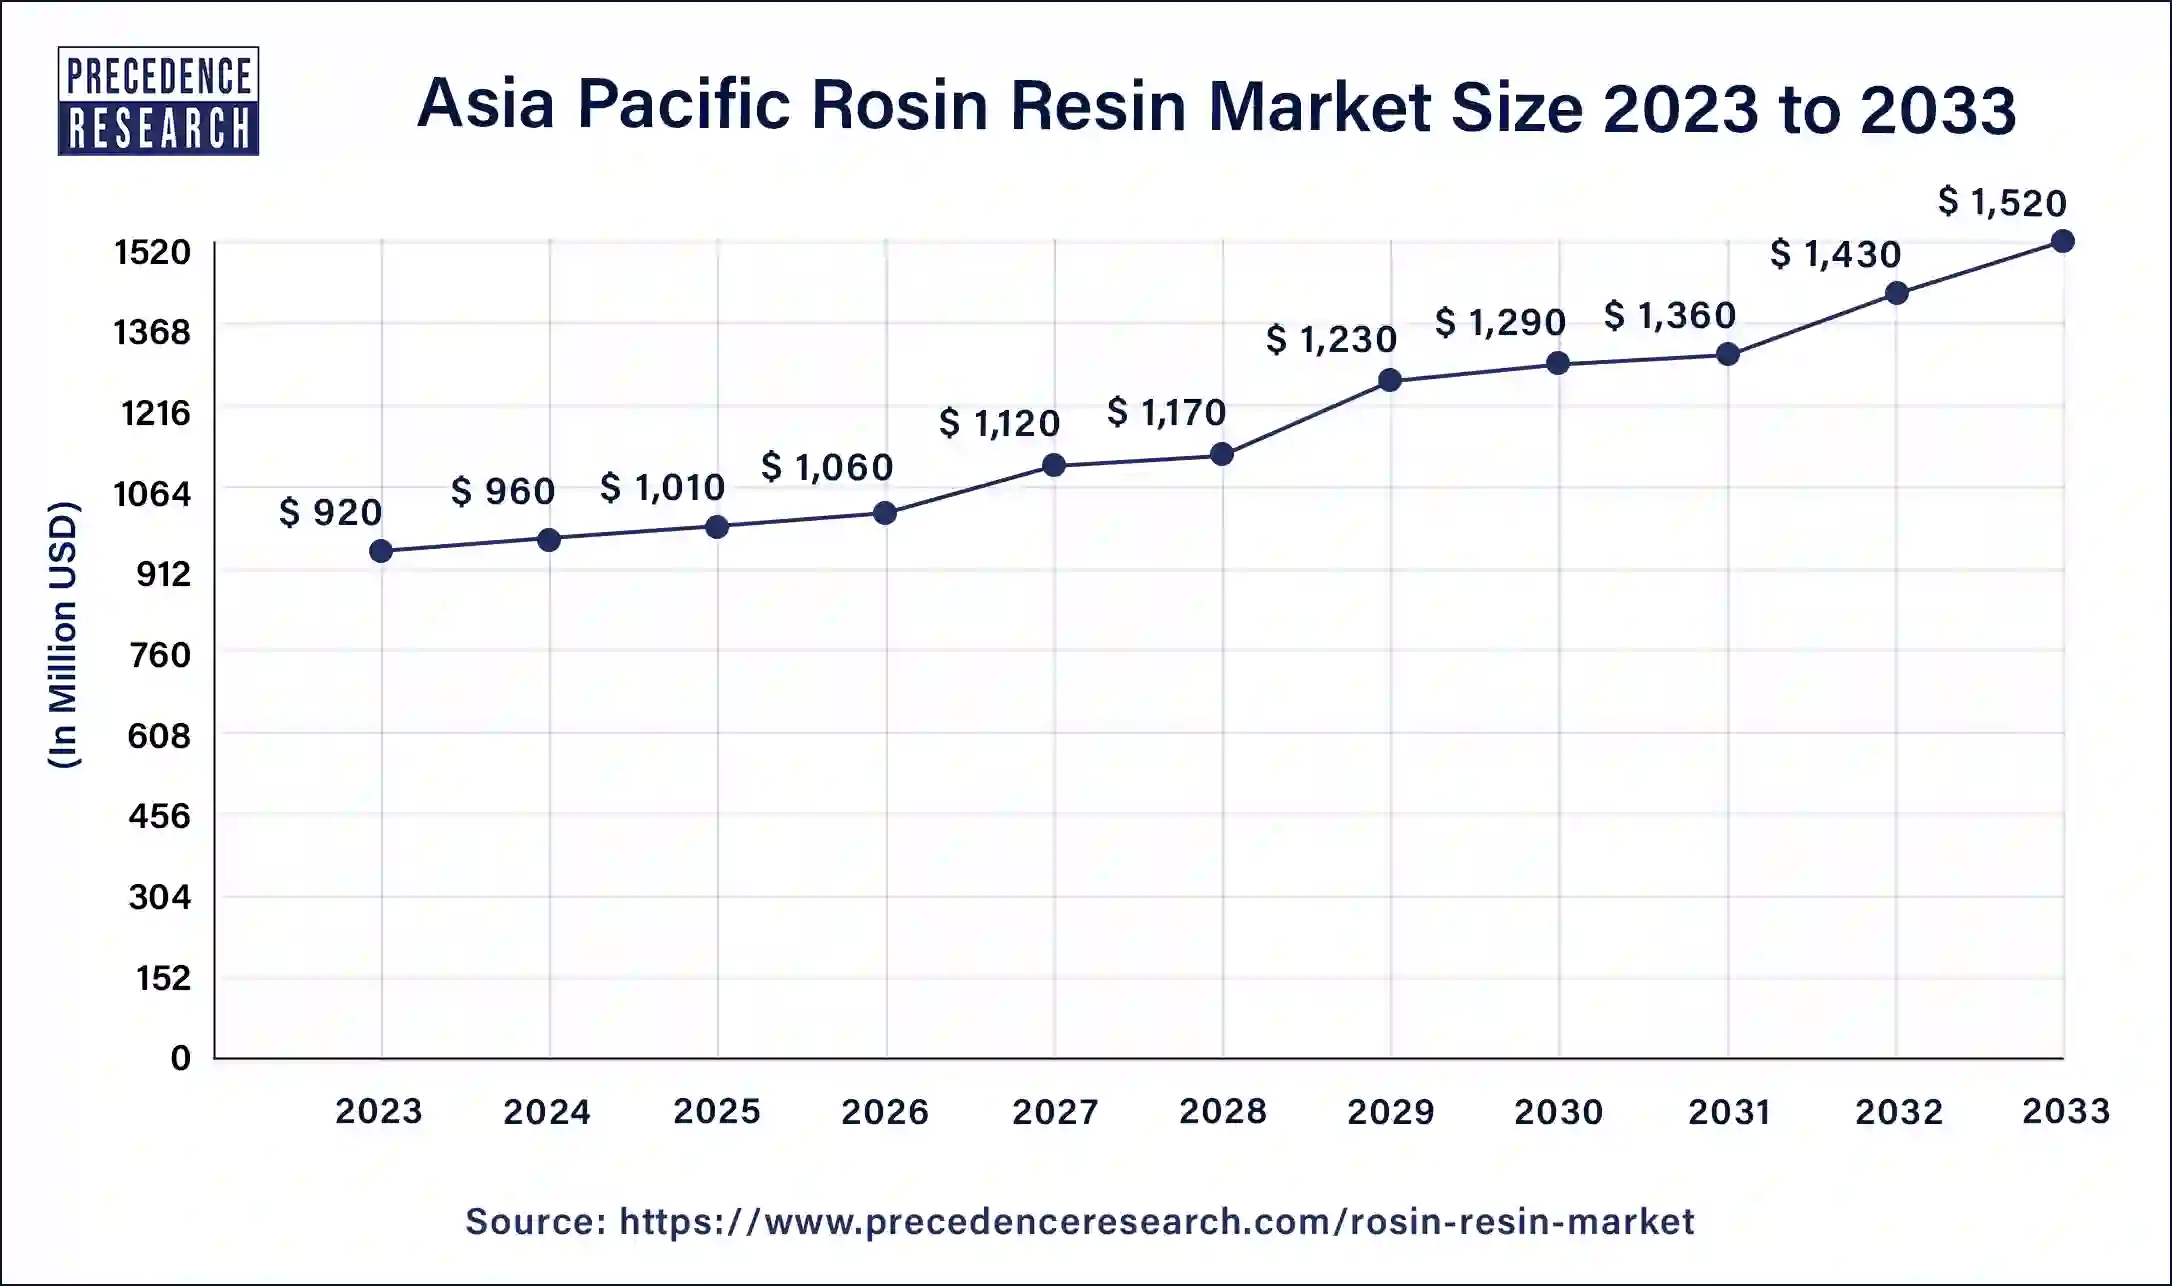 Asia Pacific Rosin Resin Market Size 2024 to 2033